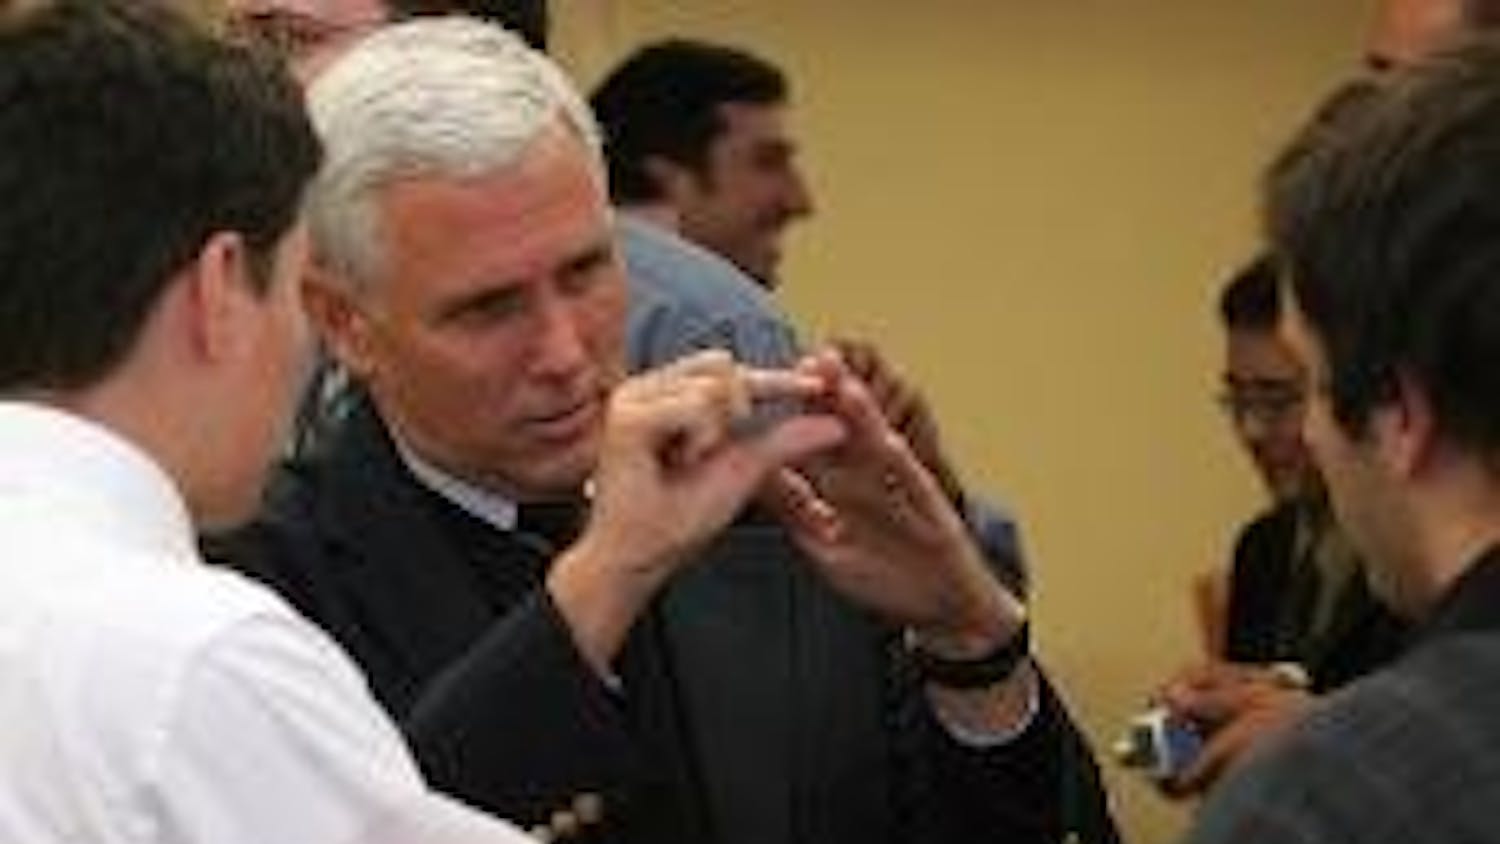 TALKING POINTS - Rep. Mike Pence, R-Ind., talks with Michael Monrroy (left) and Ajay Bruno (right) before speaking at an event sponsored by the AU College Republicans Tuesday night in Mary Graydon Center. During his speech, Pence said the Republican Party